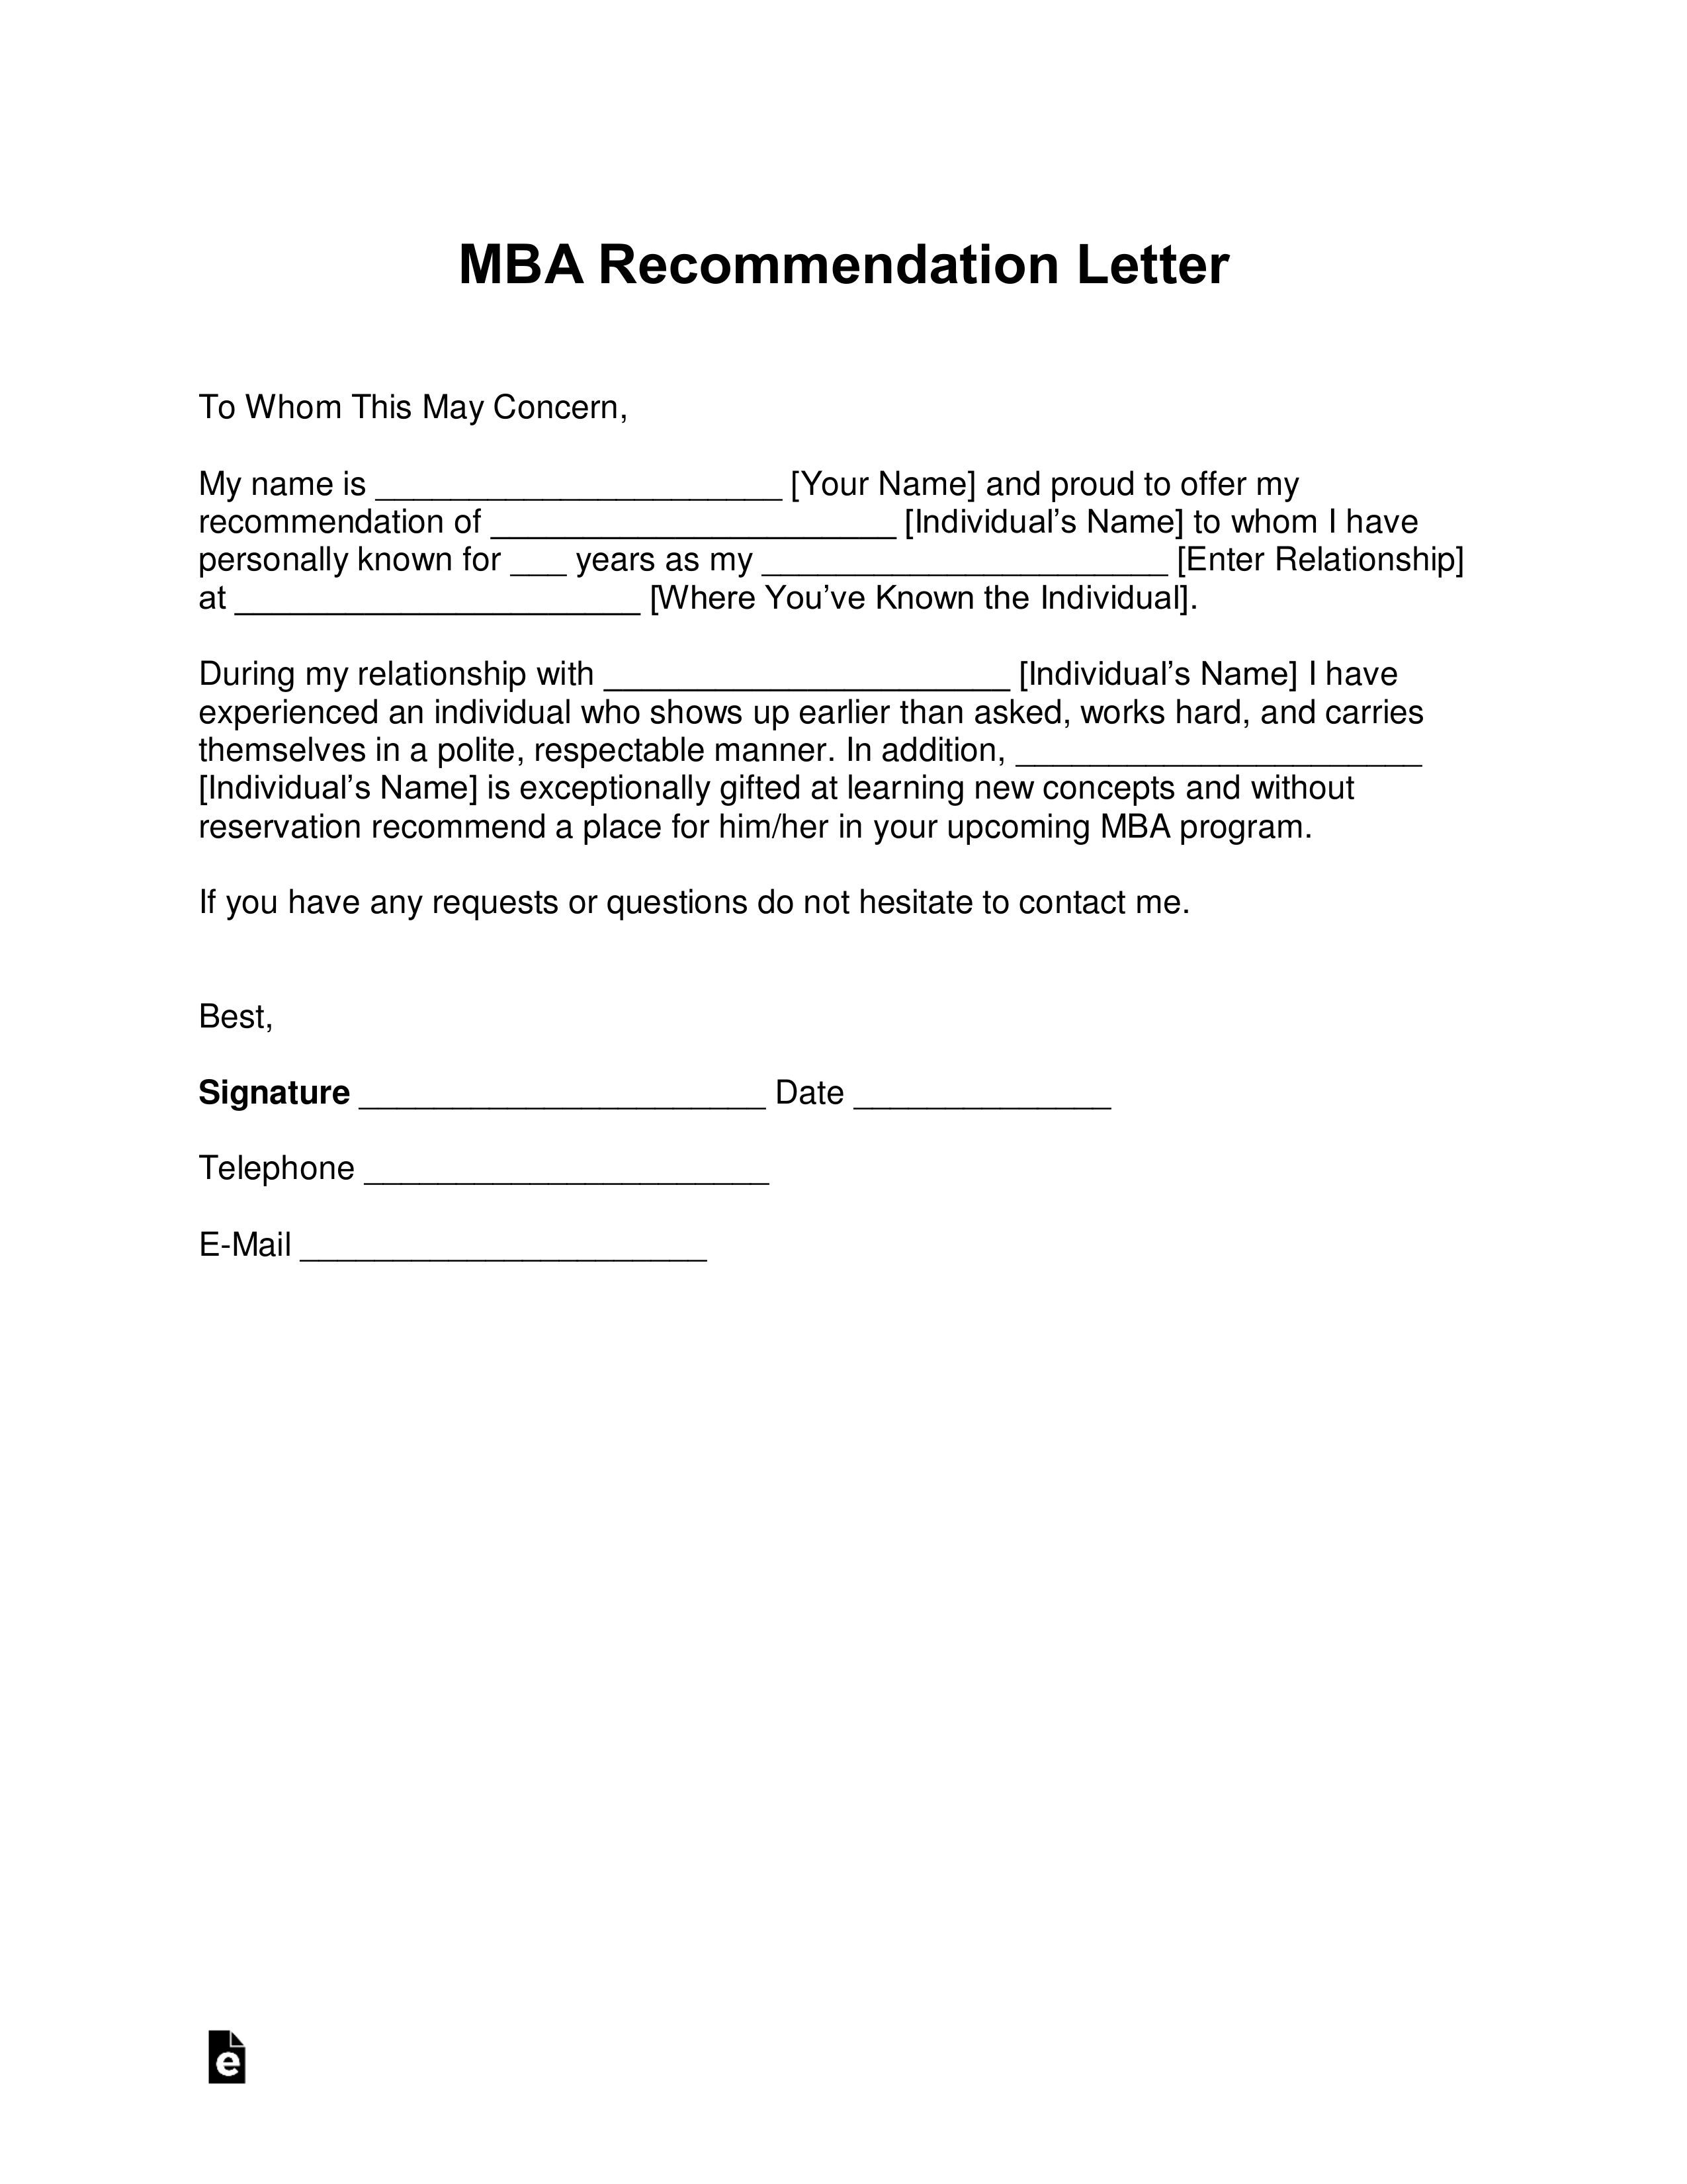 Sample Recommendation Letter From Employer from eforms.com